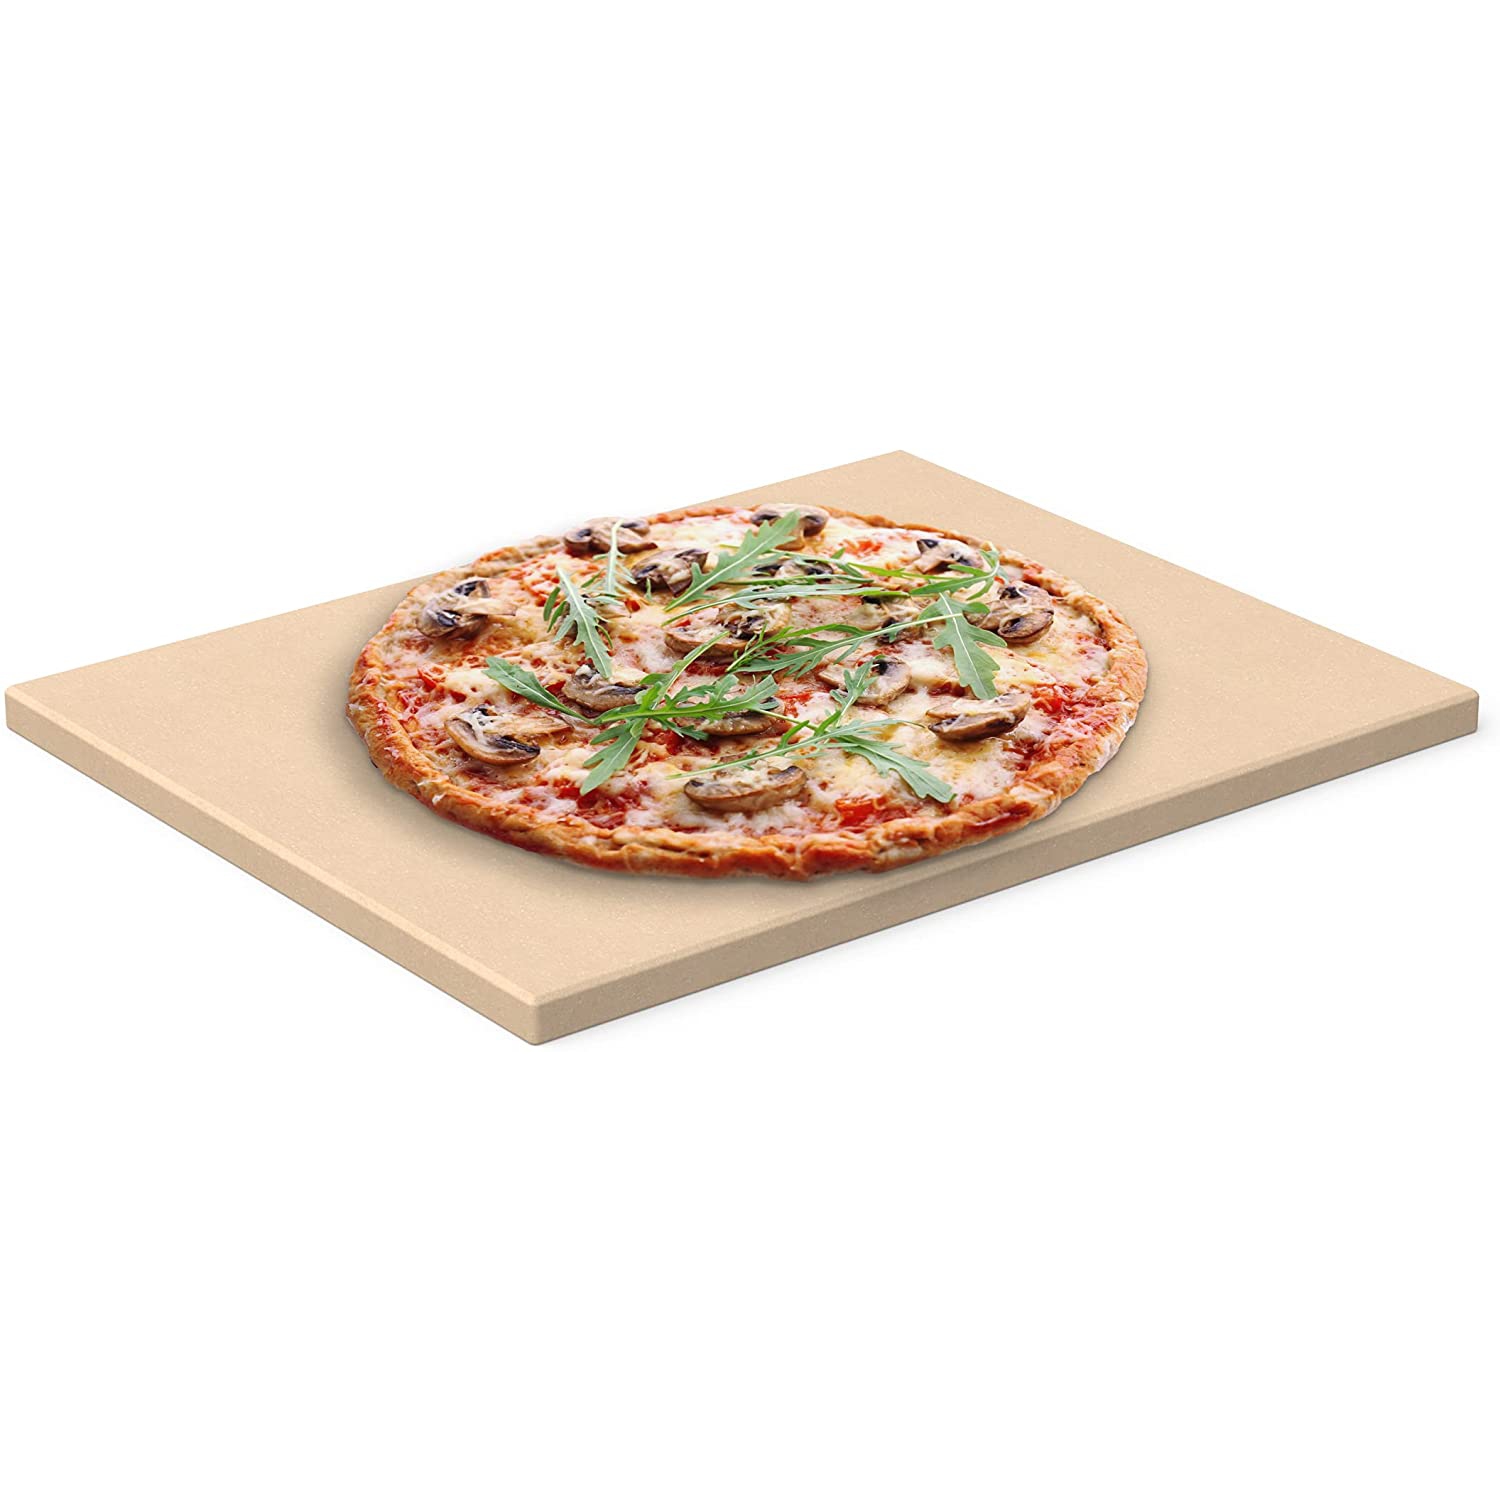 Chef Pomodoro Pizza Stone, 15" x 12", Rectangular Natural Stone for Baking Ovens and Grills, Pizza Bread Baking